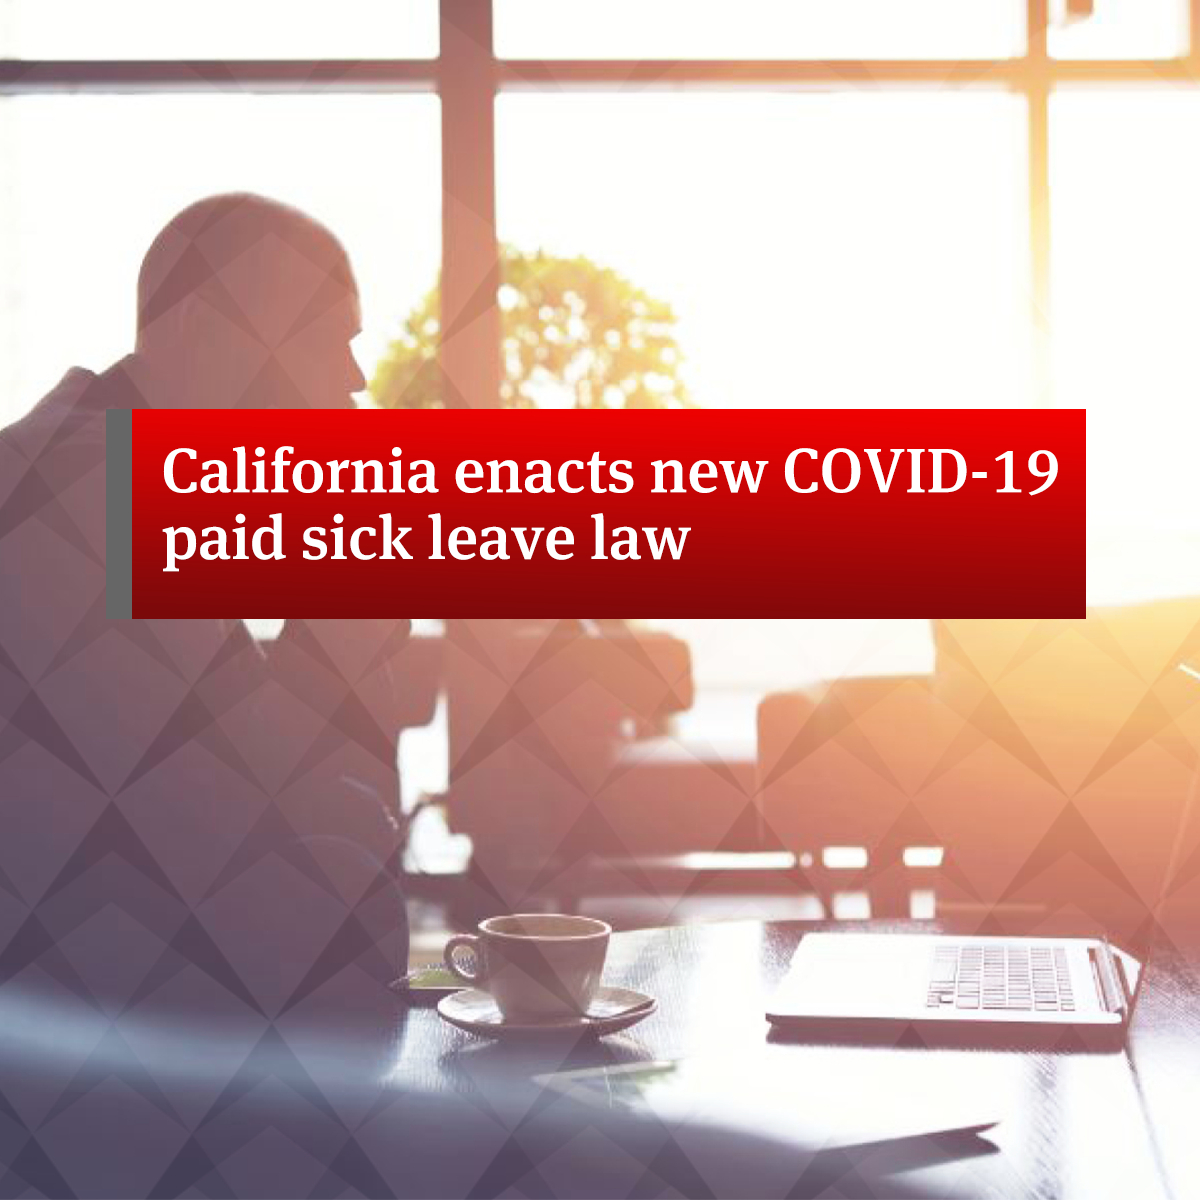 California enacts new COVID19 paid sick leave law Global law firm